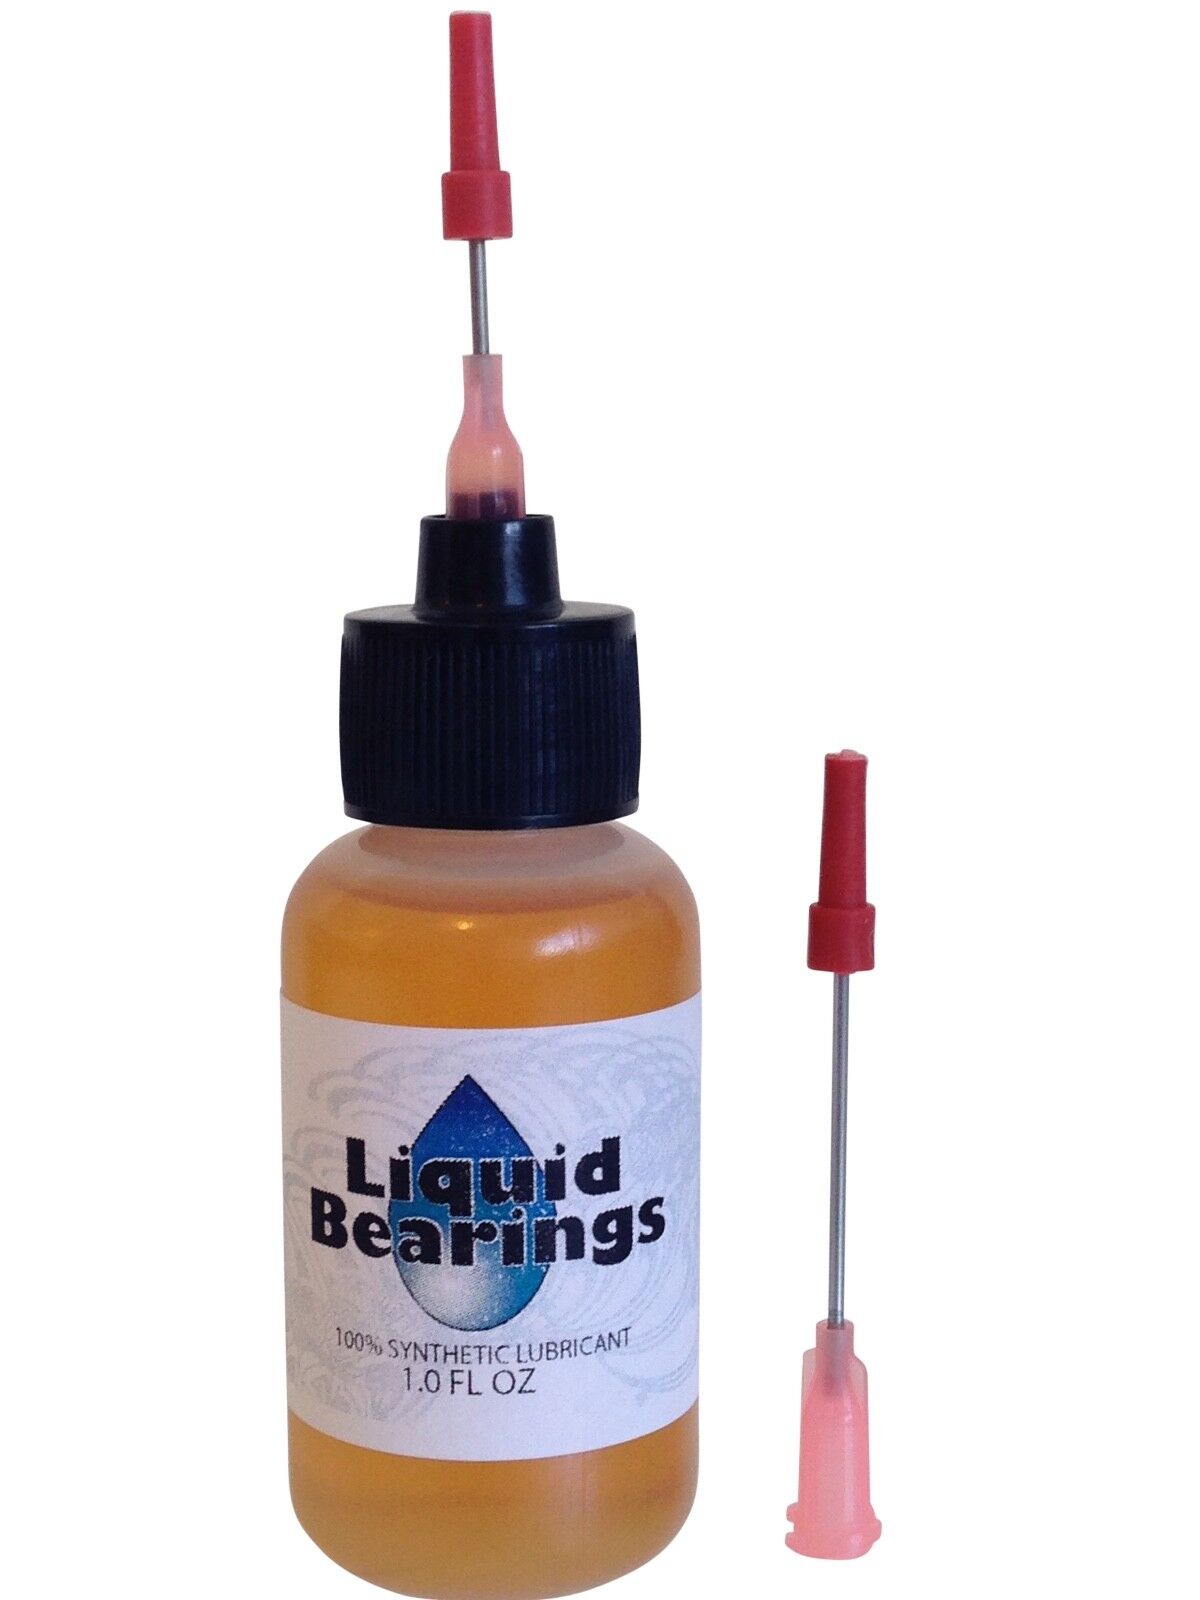 Liquid Bearings, BEST 100%-synthetic oil for Seeburg or any jukebox, PLEASE READ